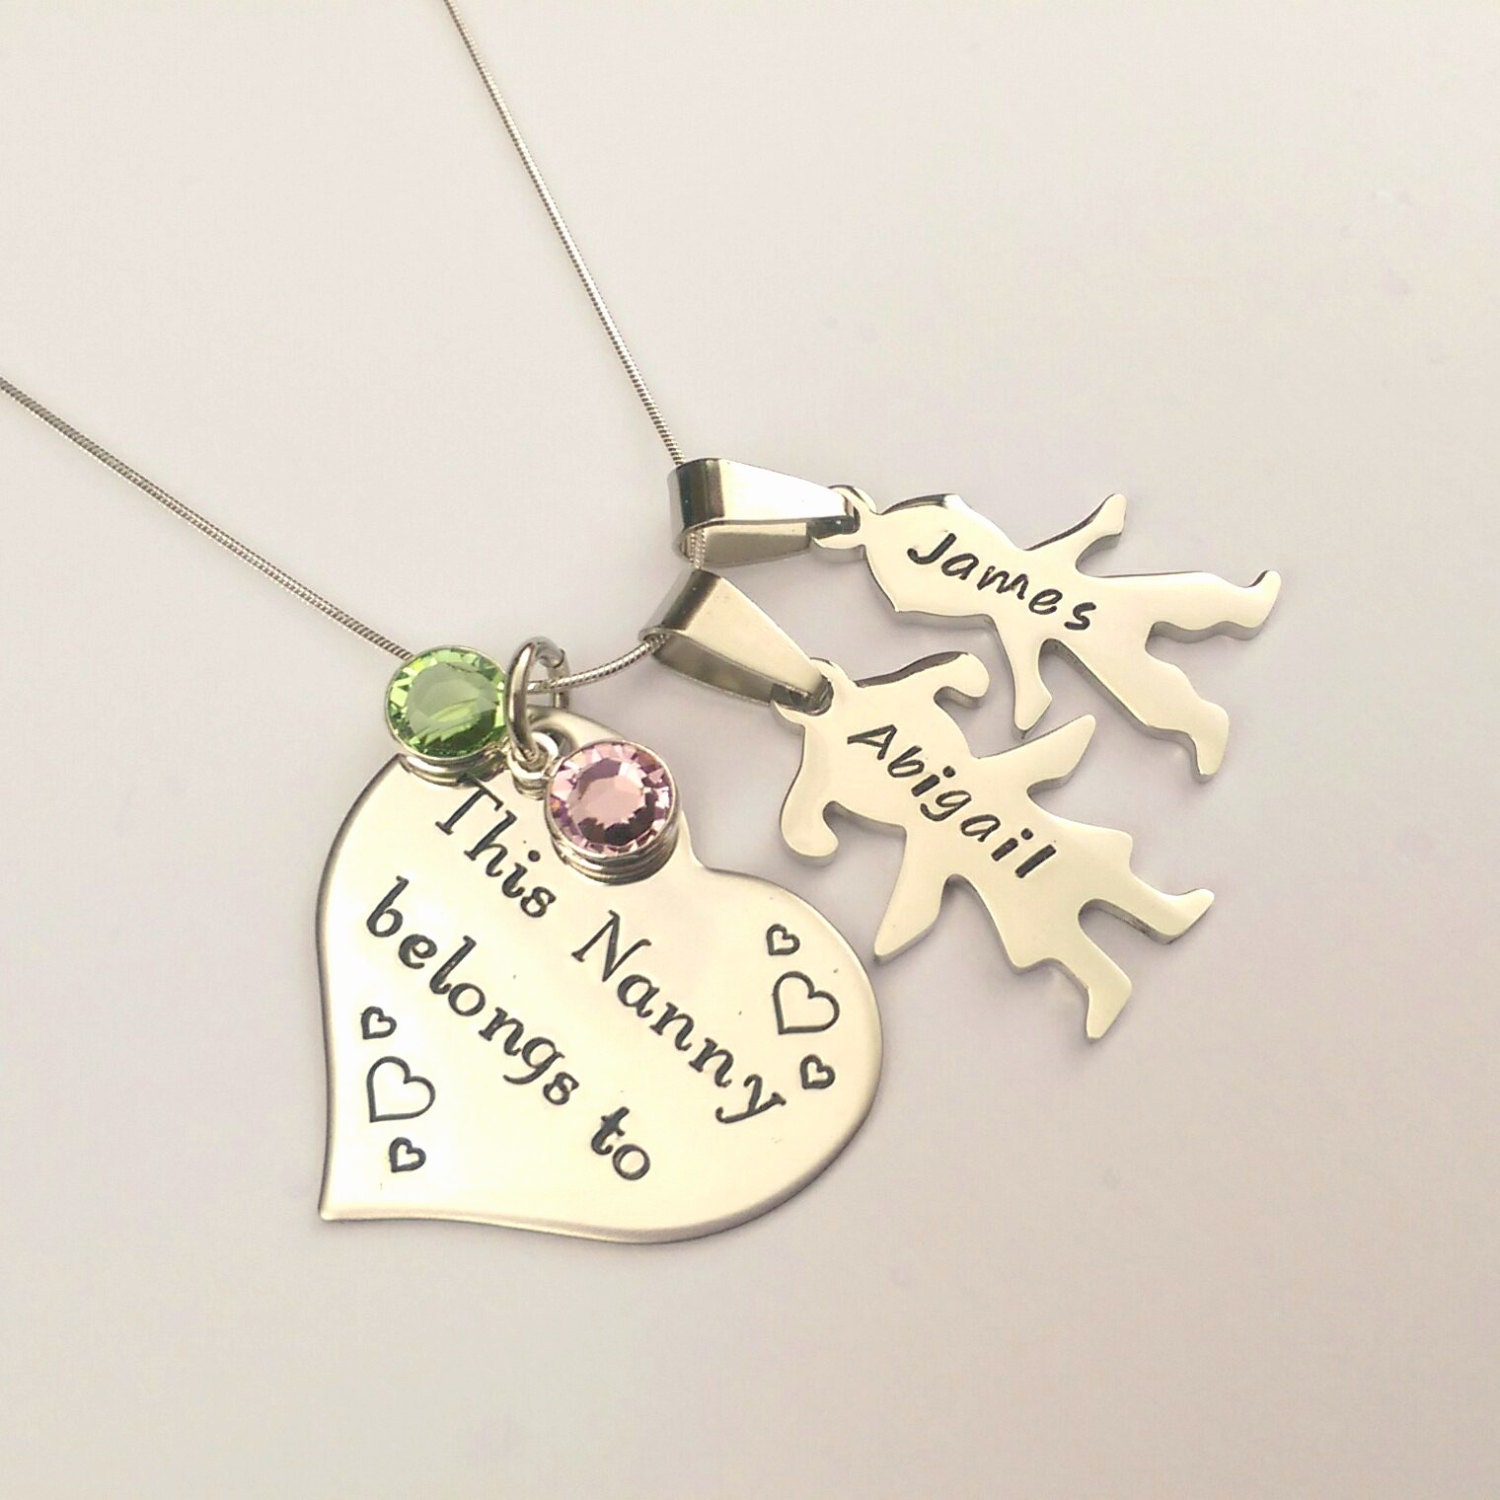 Personalised Nanny gift - personalised grandma gift - Mummy necklace - name birthstone necklace - gift for her - personalised birthday gift